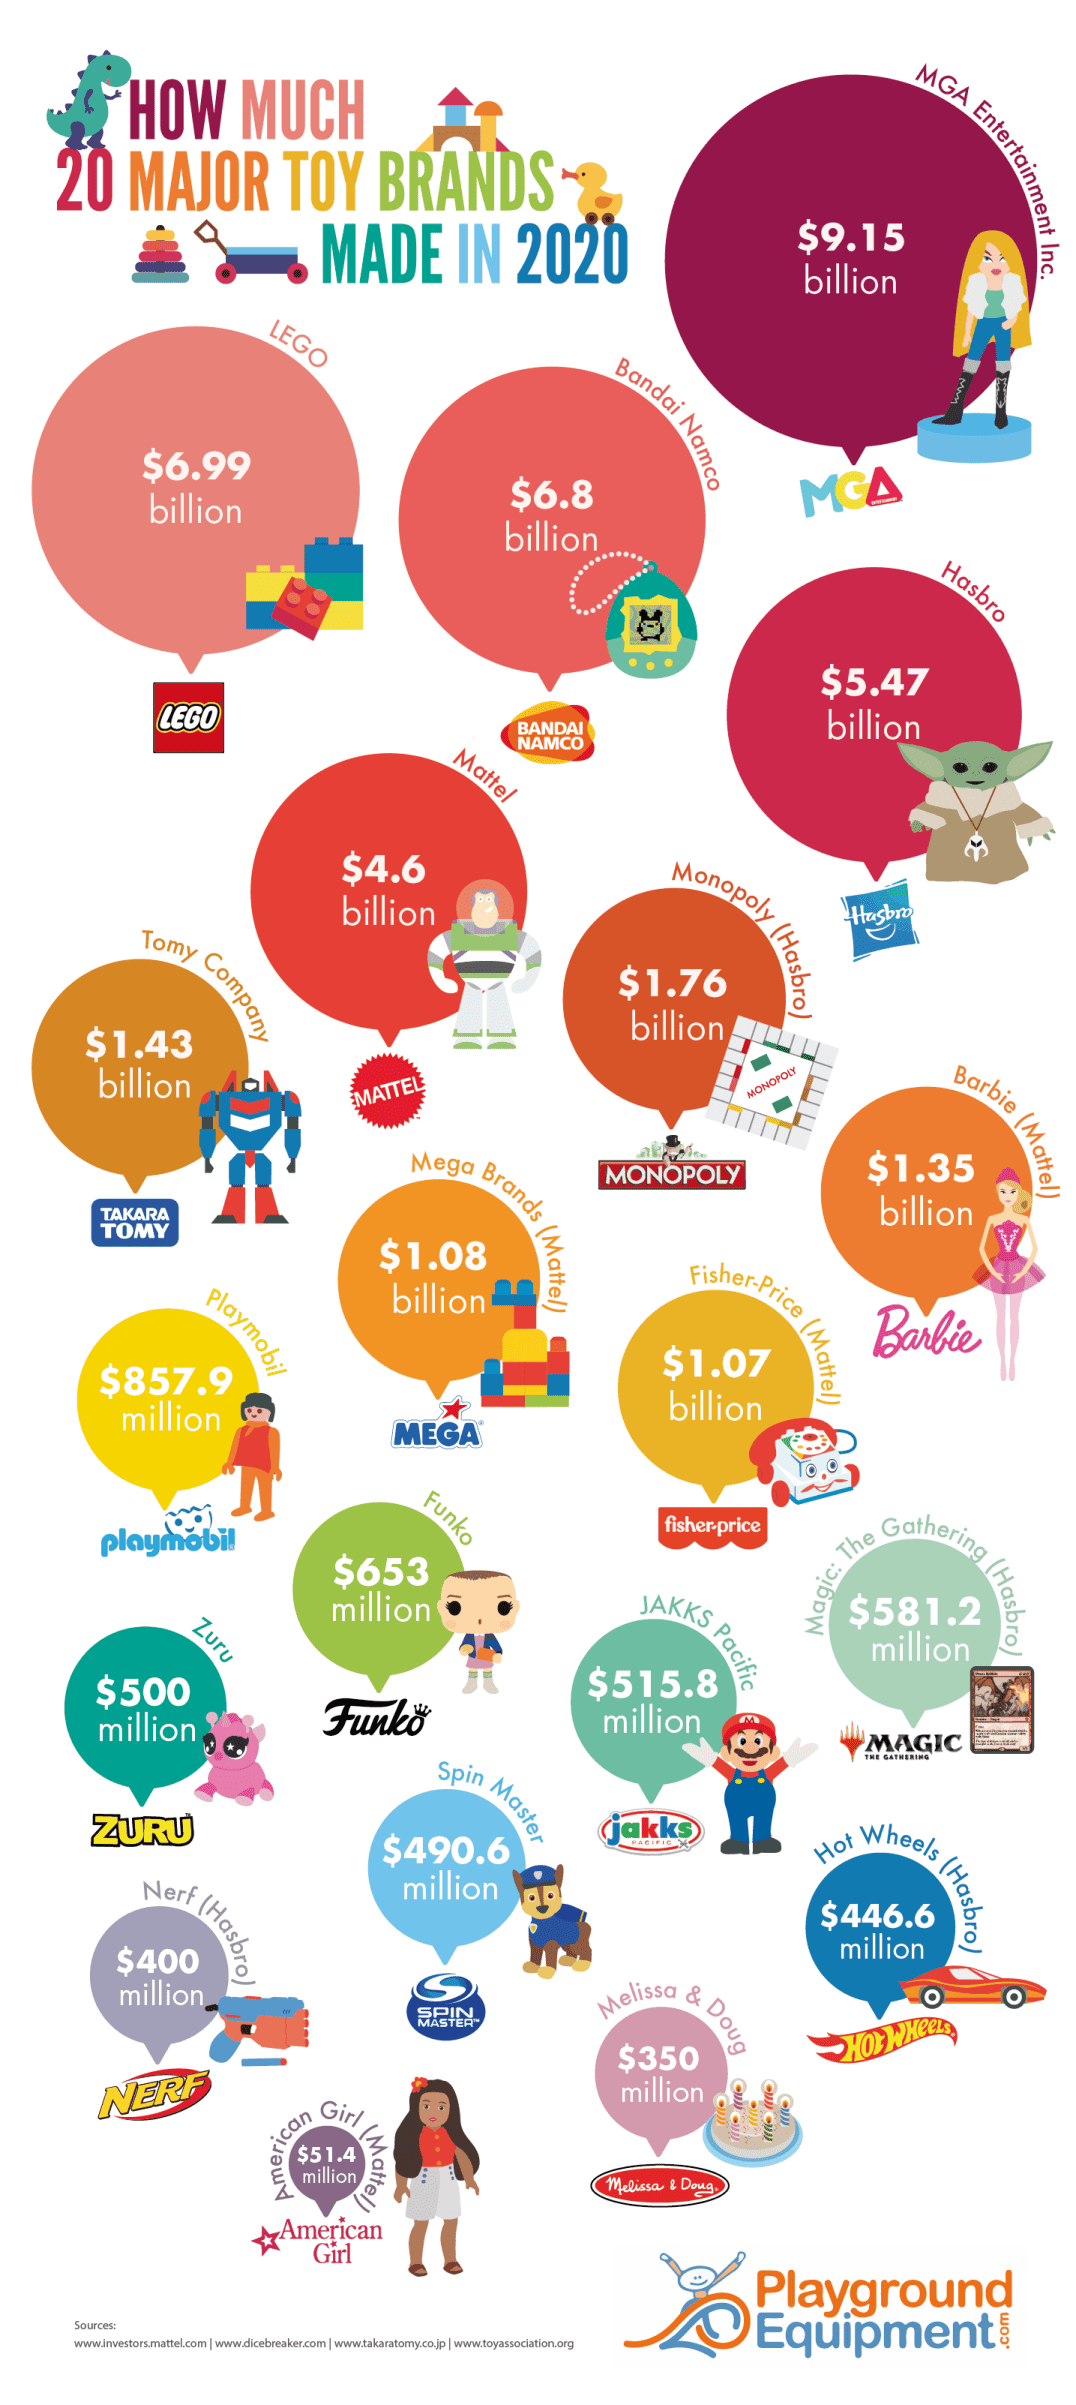 How Much 20 Major Toy Brands Made in 2020-Infographic